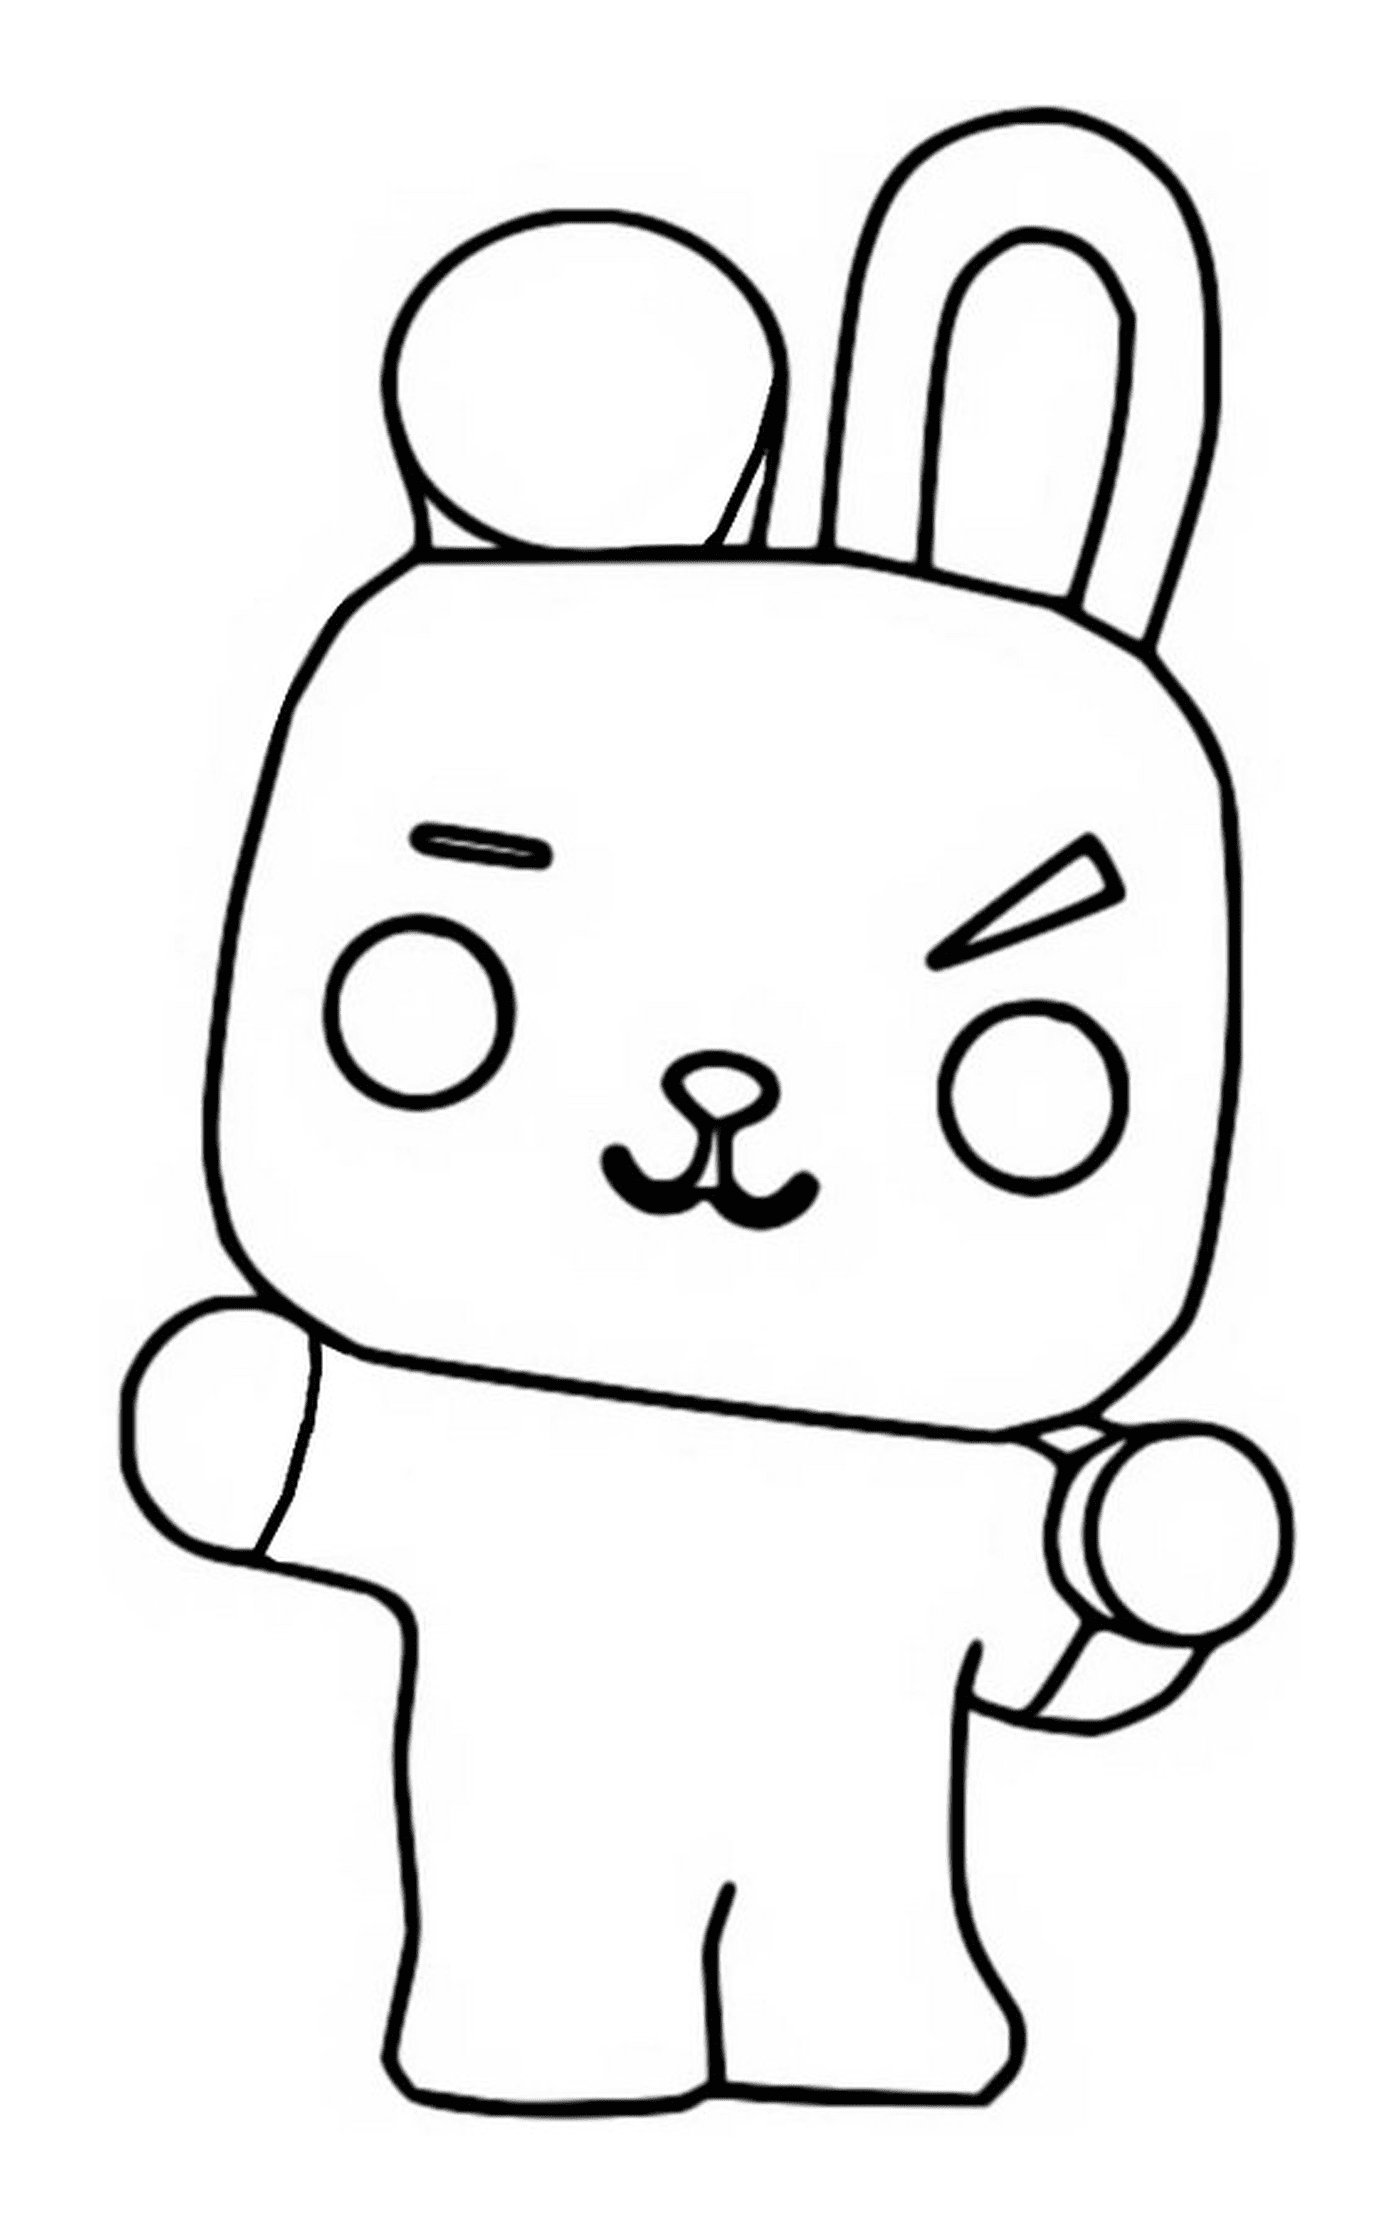  Cooky, BT21, cat with a knot on his head 